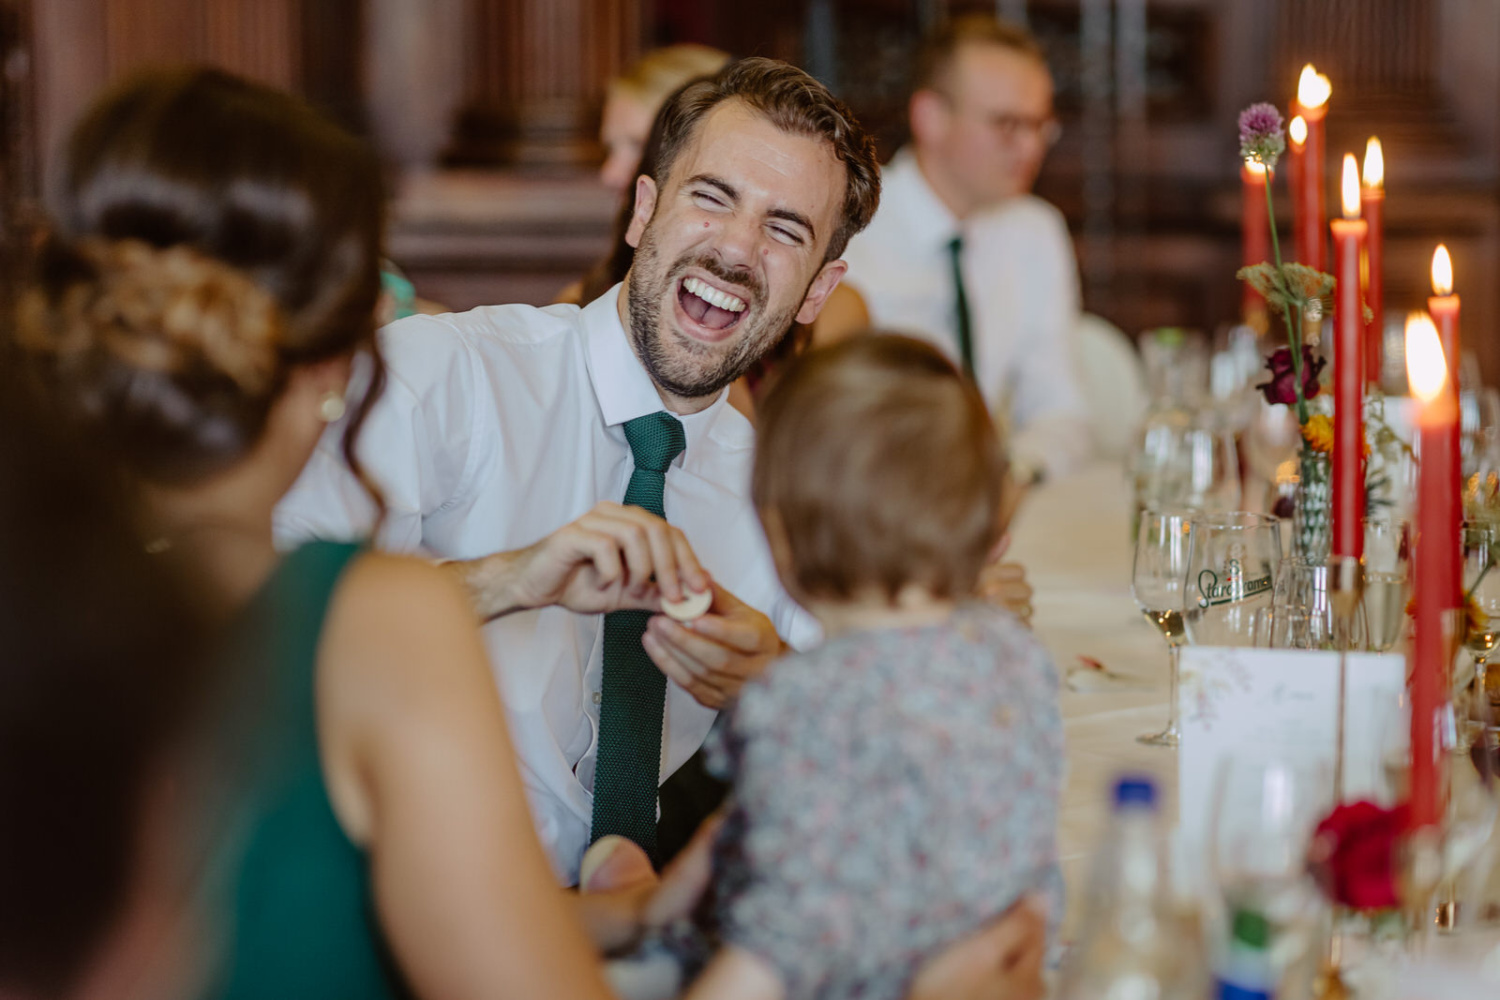 A man laughing at a dinner table with a child.